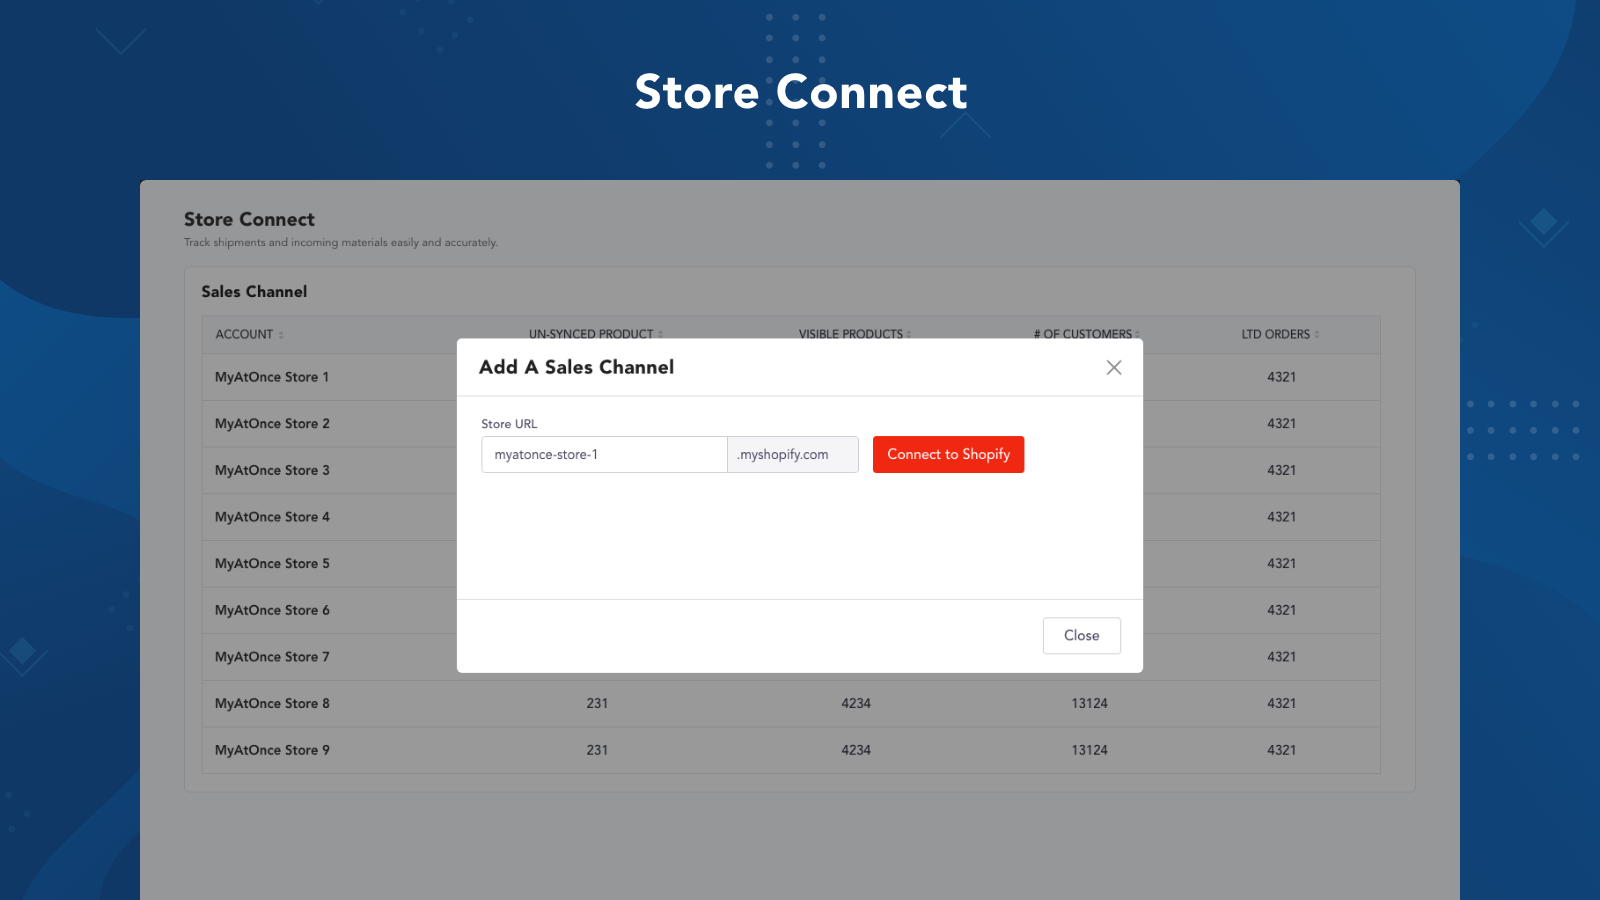 Store Connect